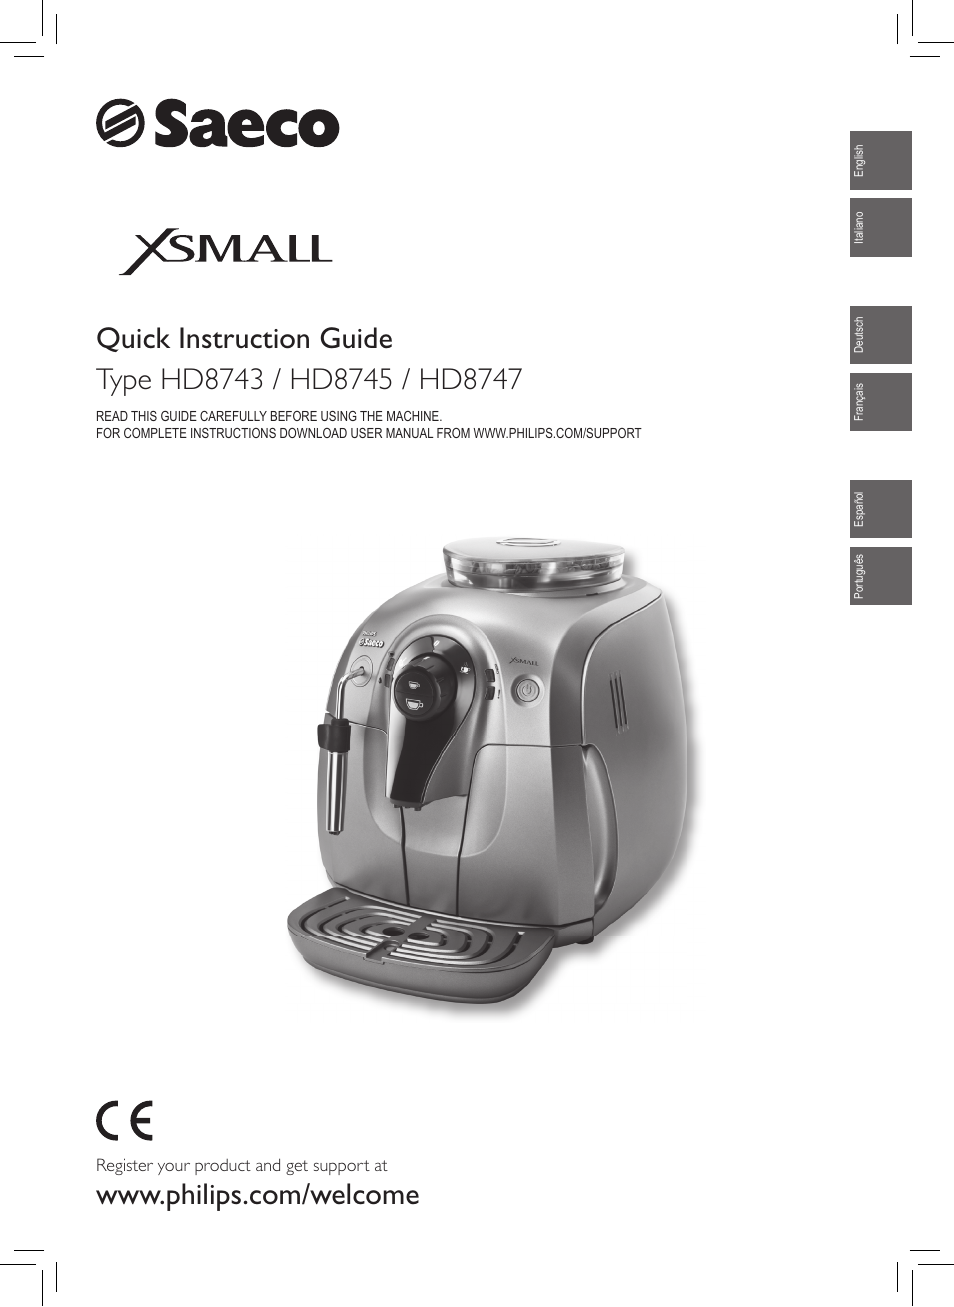 Philips Saeco Xsmall Cafetera expreso súper automática User Manual | 68  pages | Also for: Saeco Xsmall Machine espresso Super Automatique, Saeco  Xsmall Kaffeevollautomat